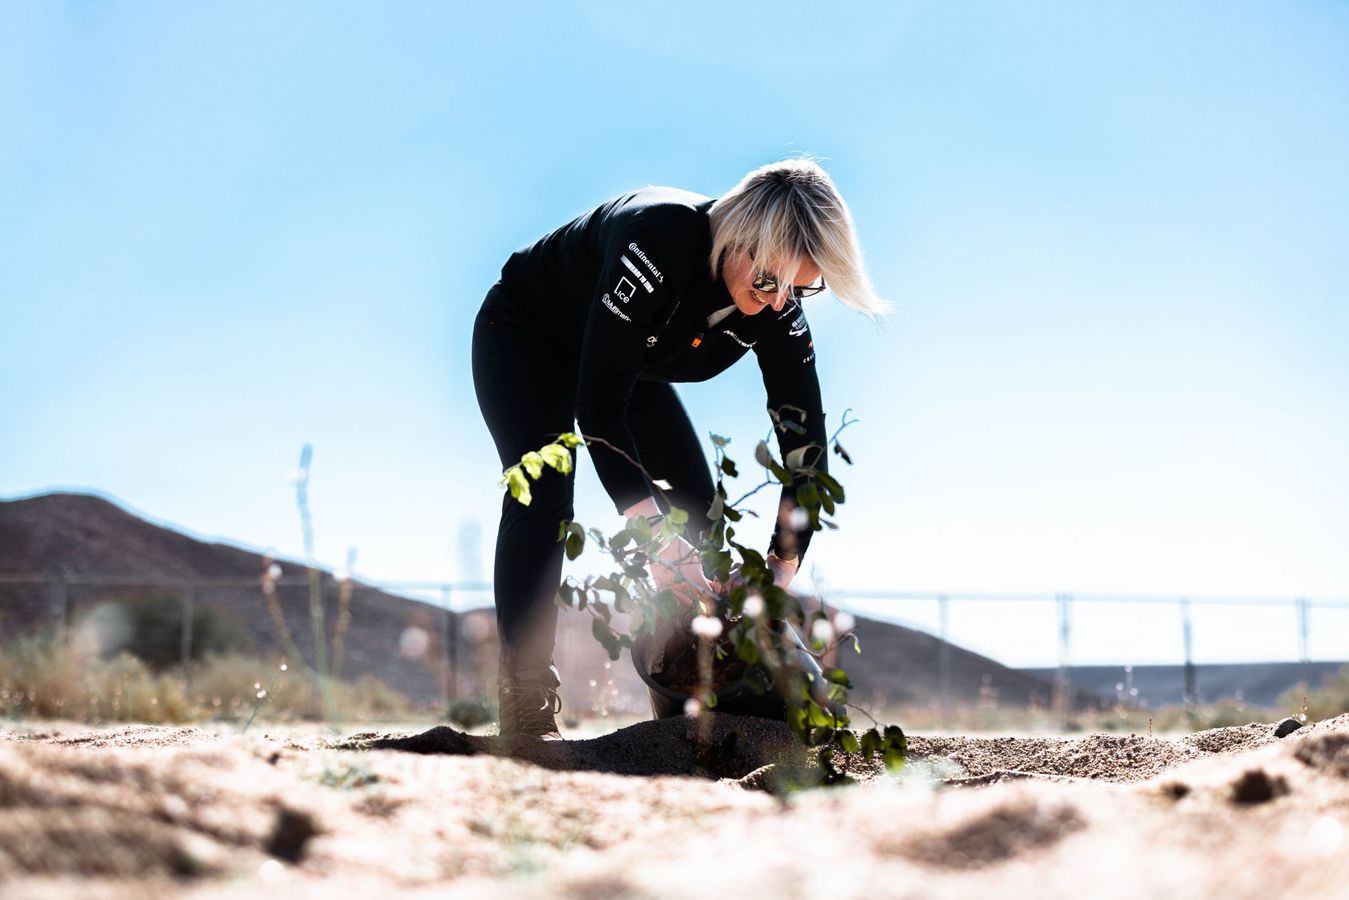 McLaren XE driver Emma joined the rest of the grid in planting the very first wave of trees at NEOM as part of a larger revegetation initiative